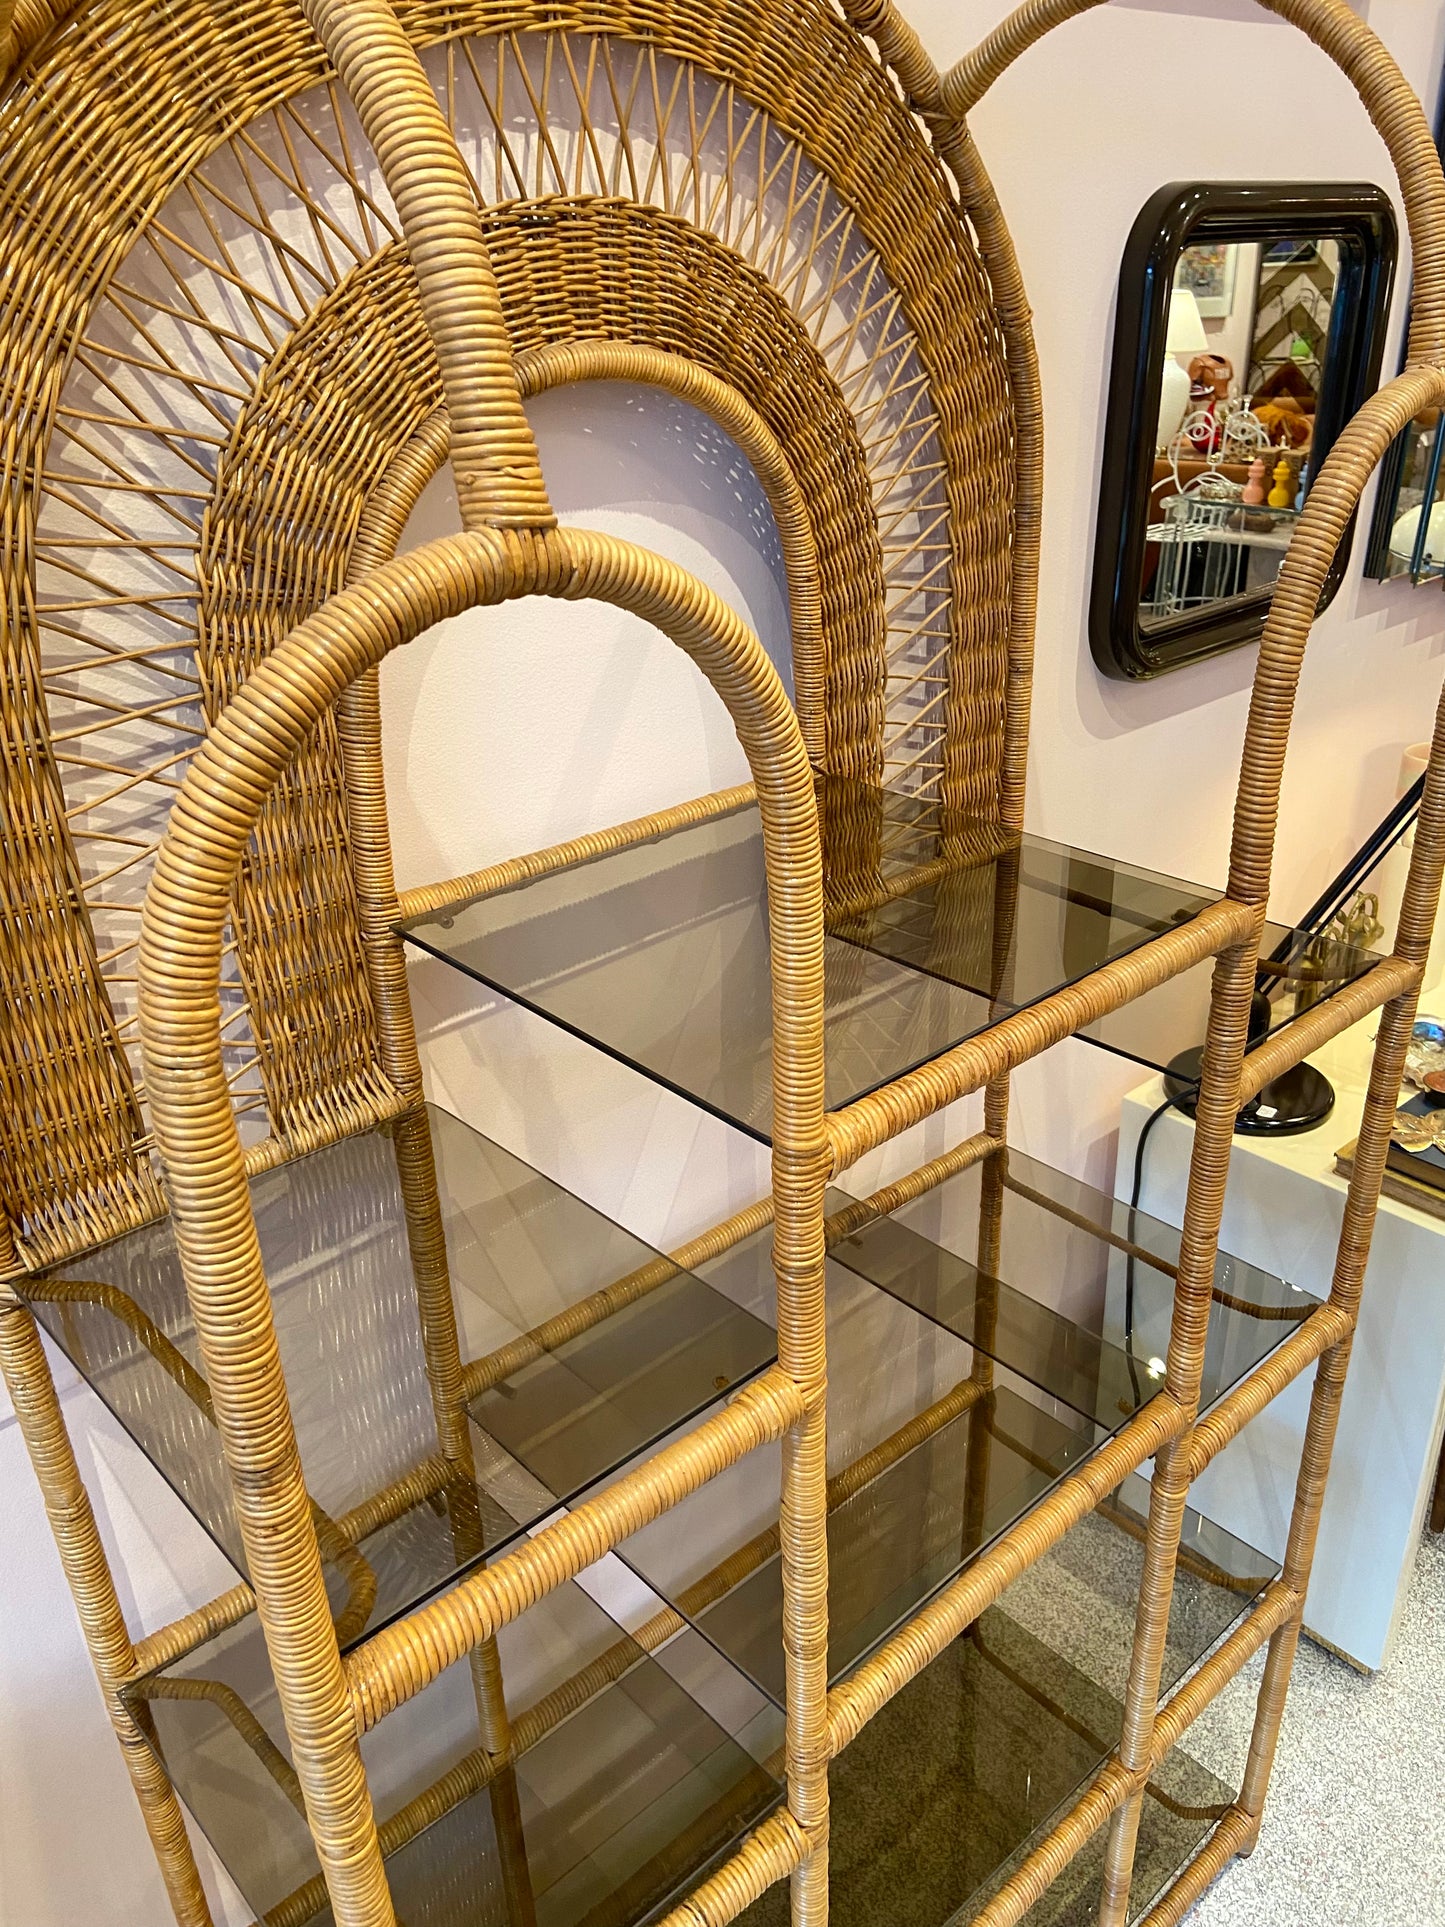 Vintage Wicker Rattan Etagere with Smoked Glass